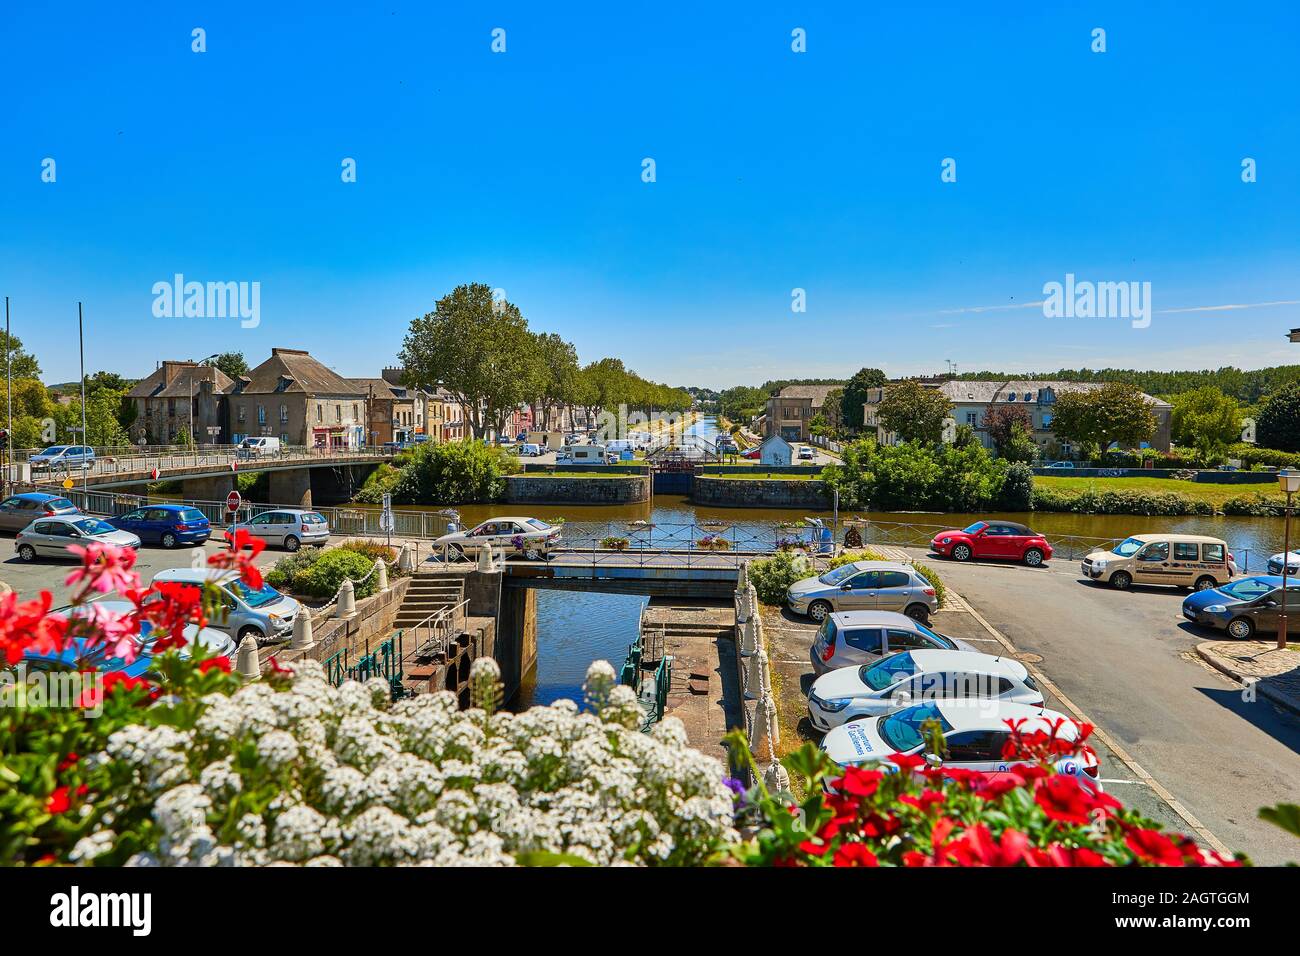 Image of Redon, Brittany, France.  Redon is a popular tourist destination with the junction between the Villain River and the Nantes - Rennes canal. Stock Photo